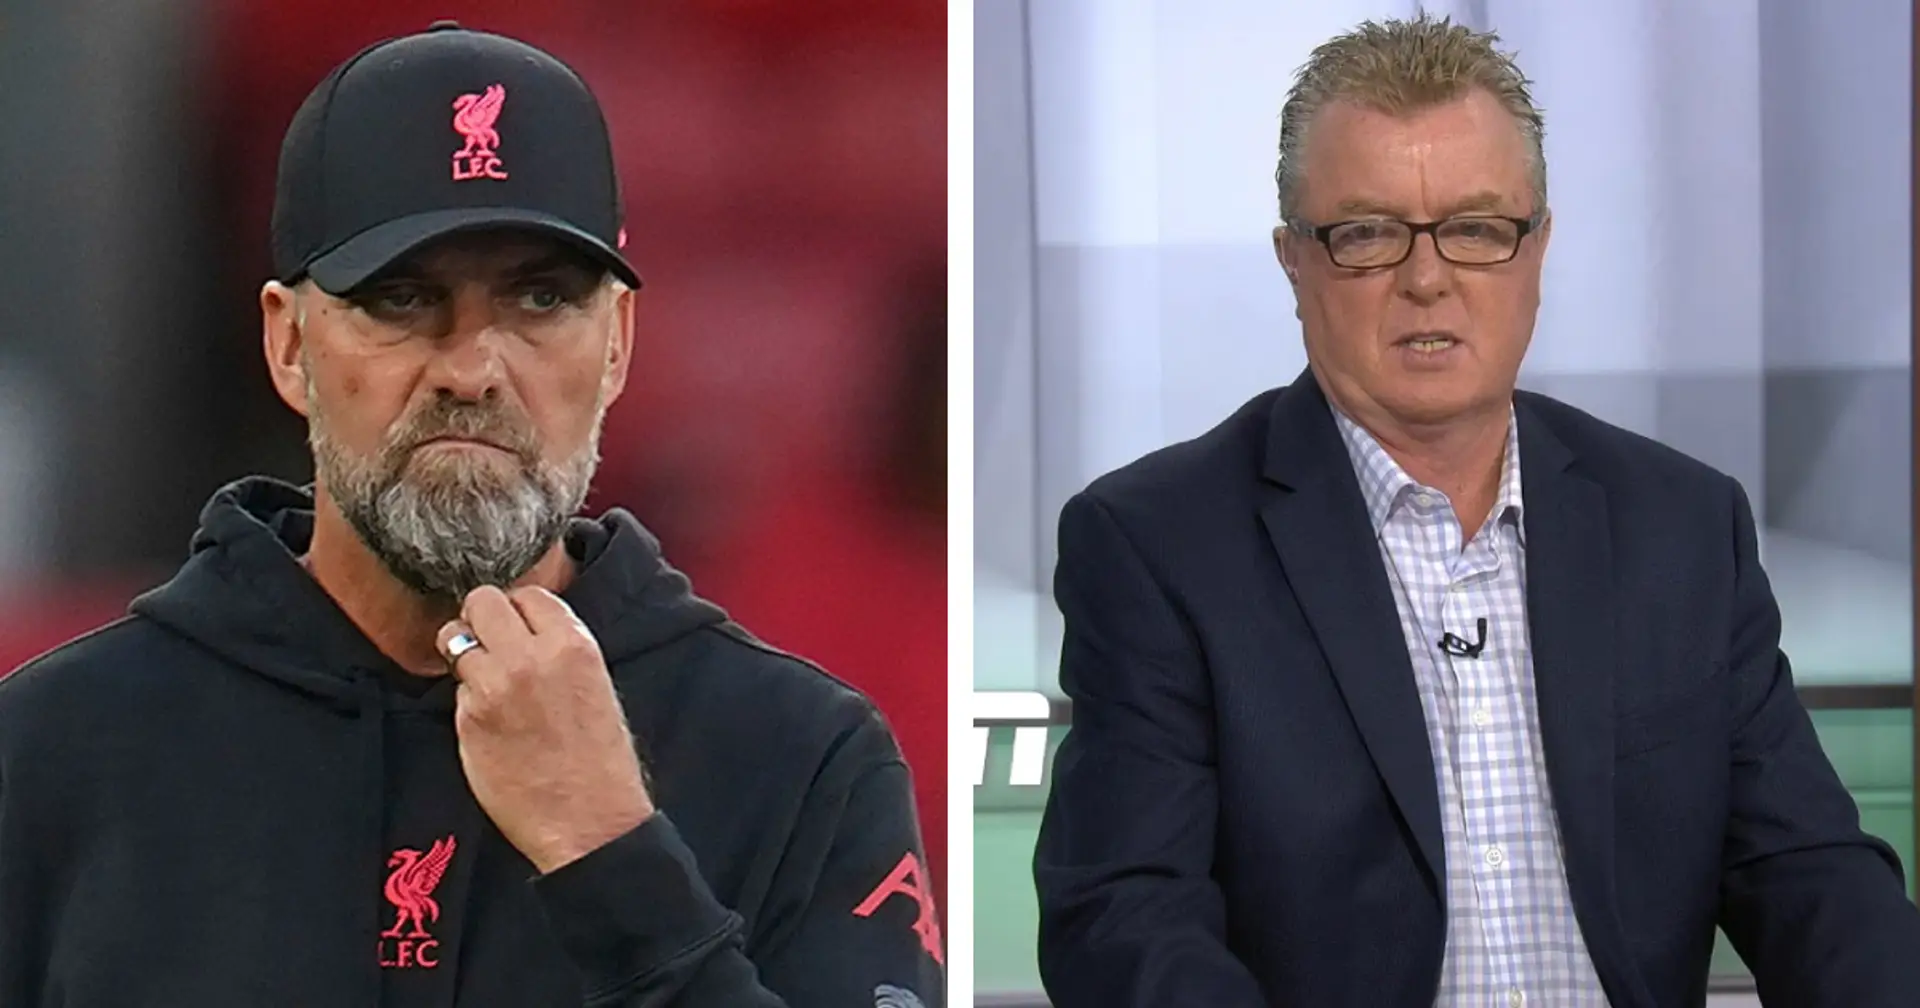 Steve Nicol names ideal coach to replace Jurgen Klopp — he already works in the Premier League